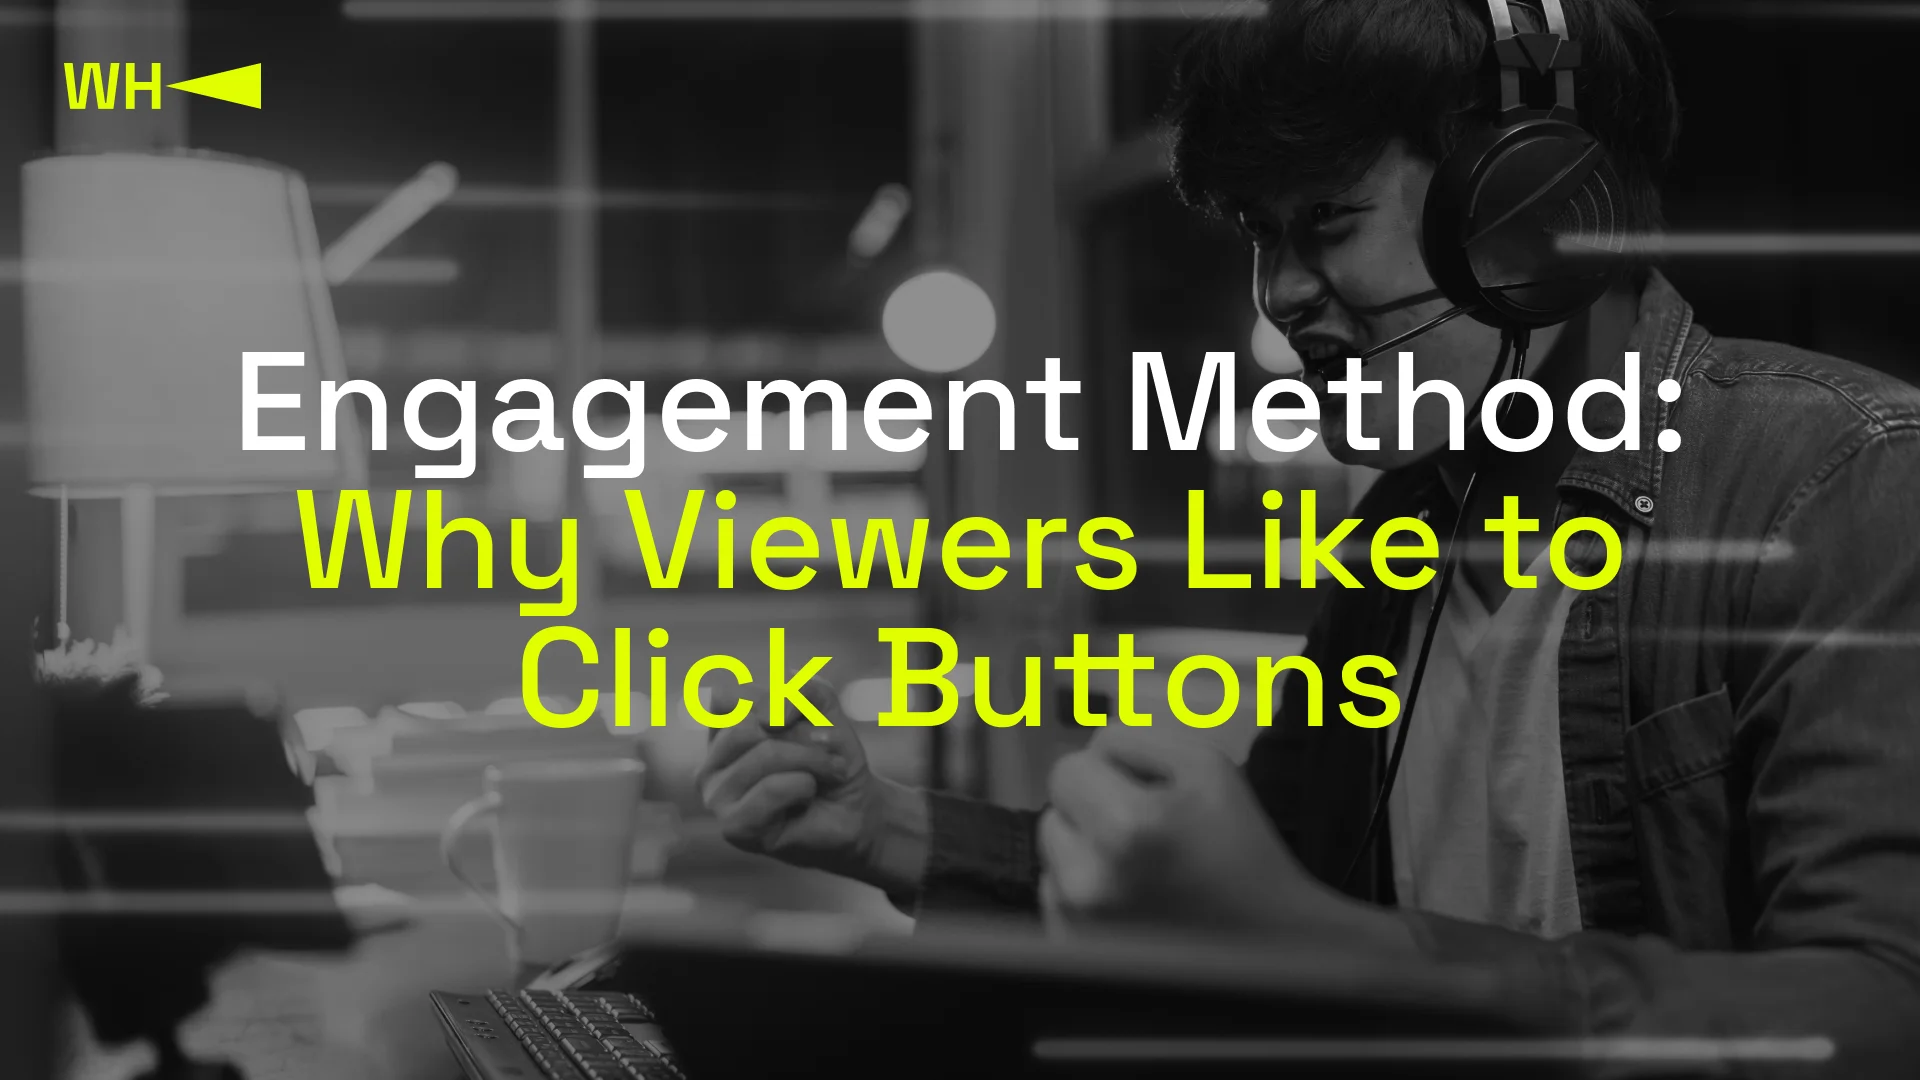 Engagement Method: Why Viewers Like to Click Buttons